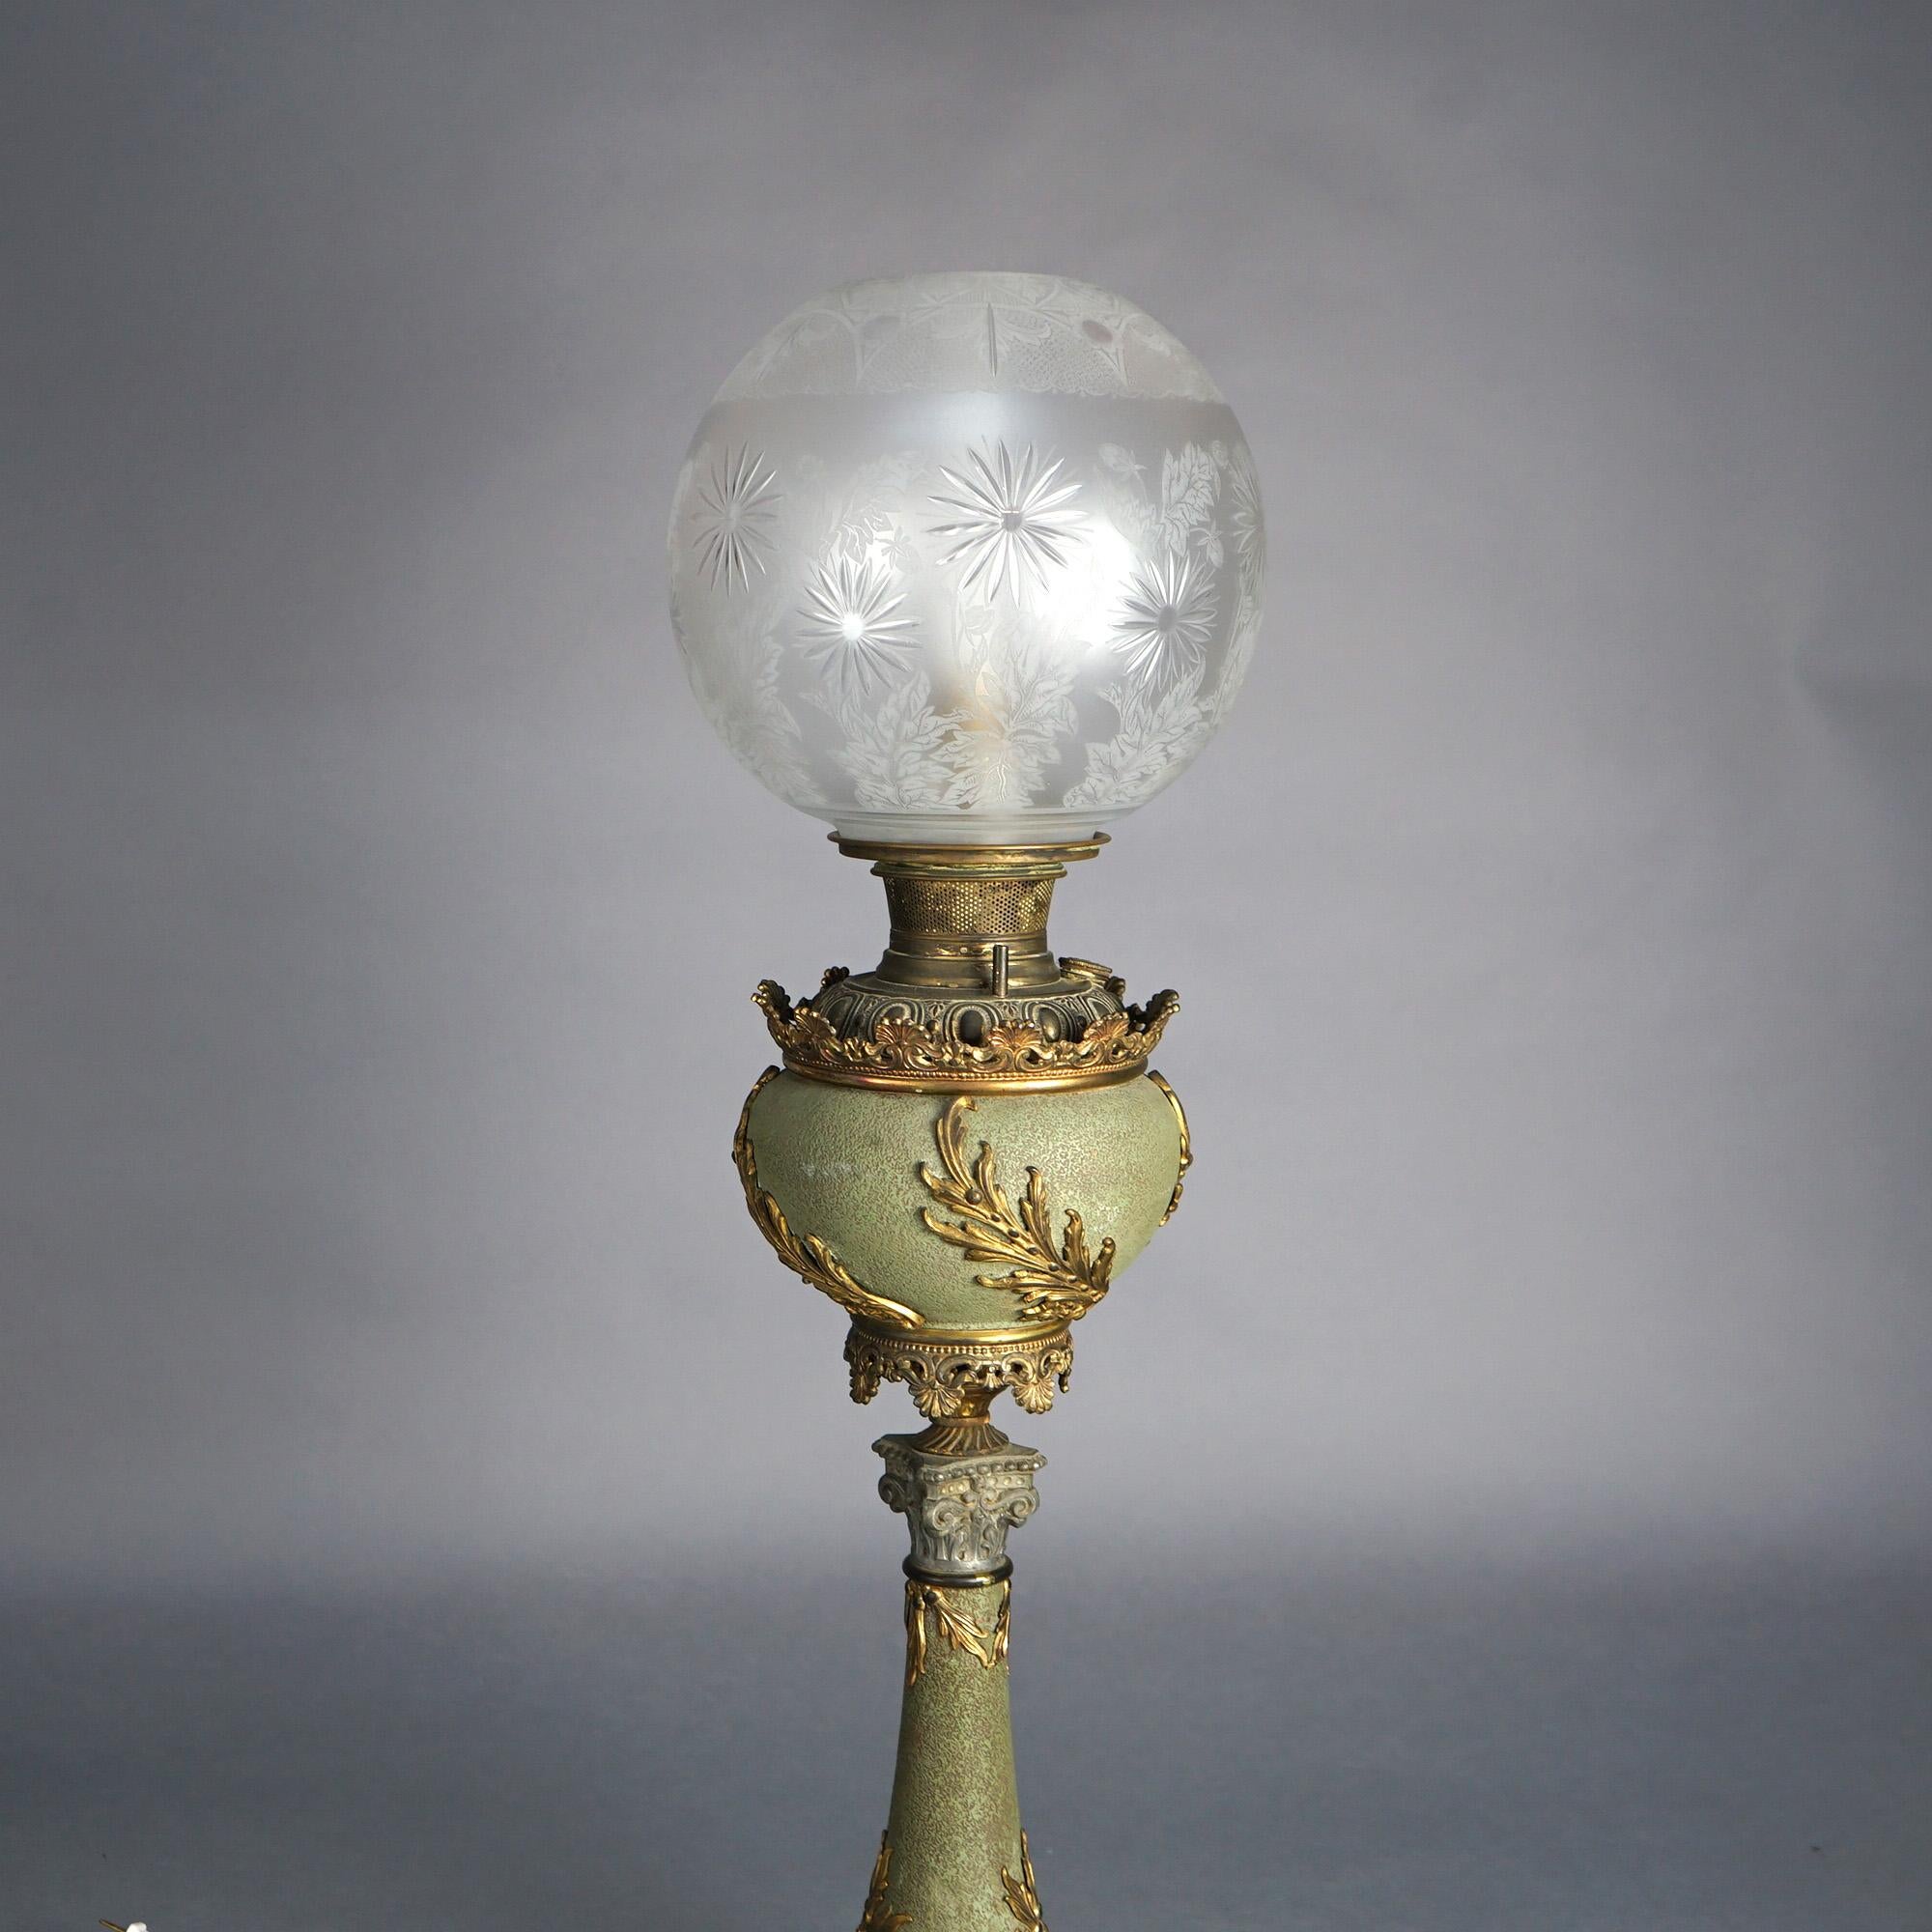 19th Century Antique Bradley & Hubbard Classical Brass Parlor Lamp with Verdigris Finish  For Sale